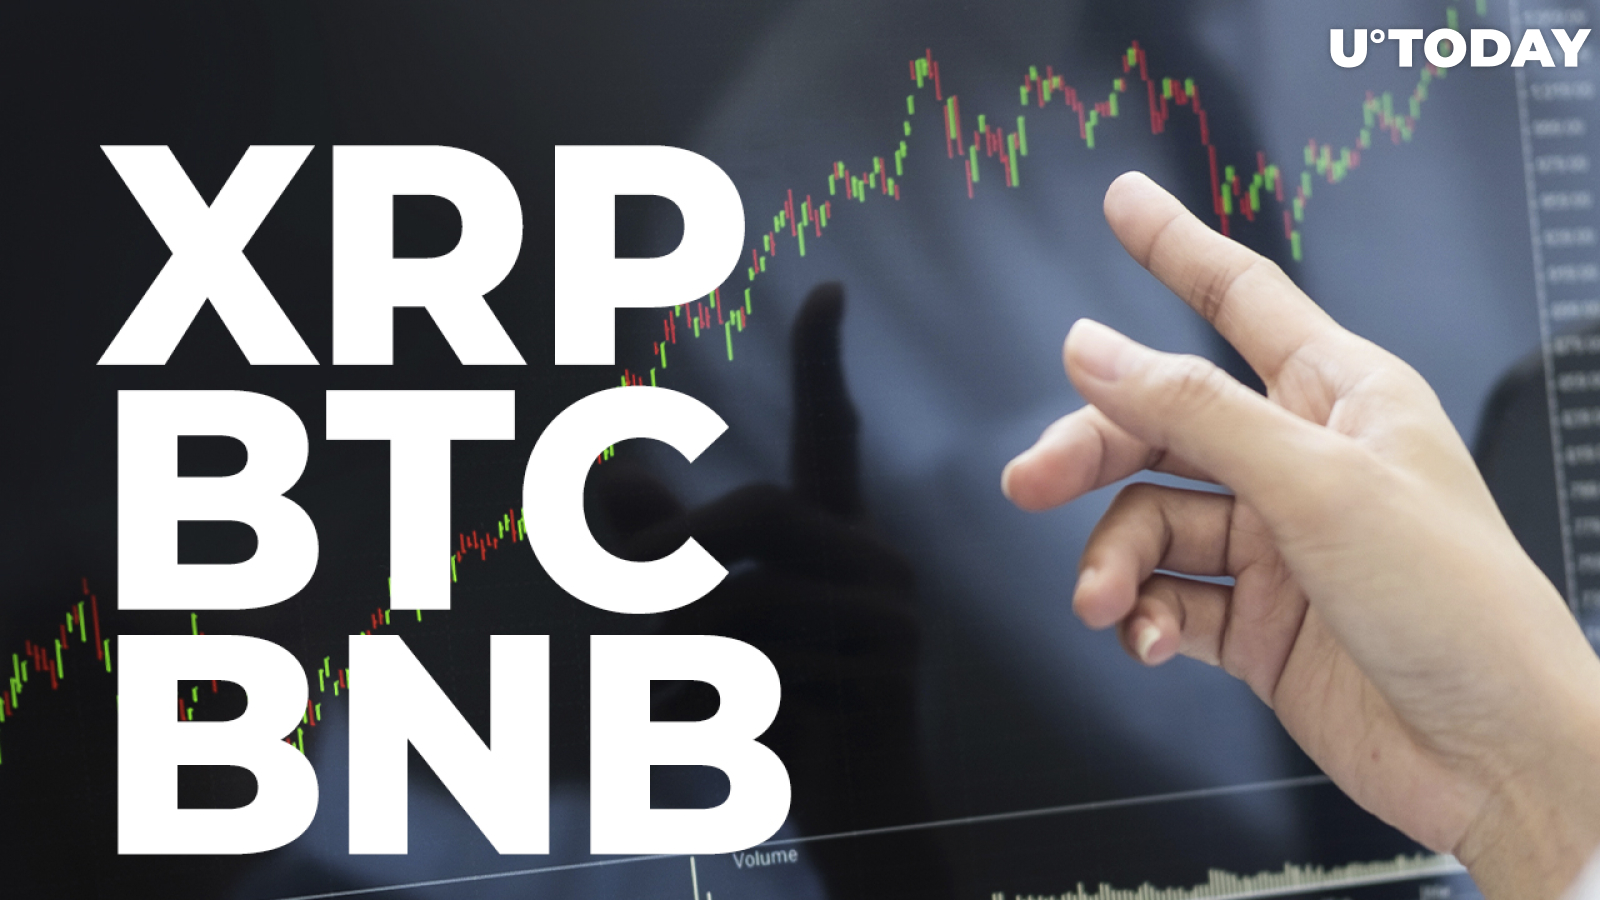 XRP, BTC, BNB Traders Believe Prices For These Coins Will Rise Soon: Report